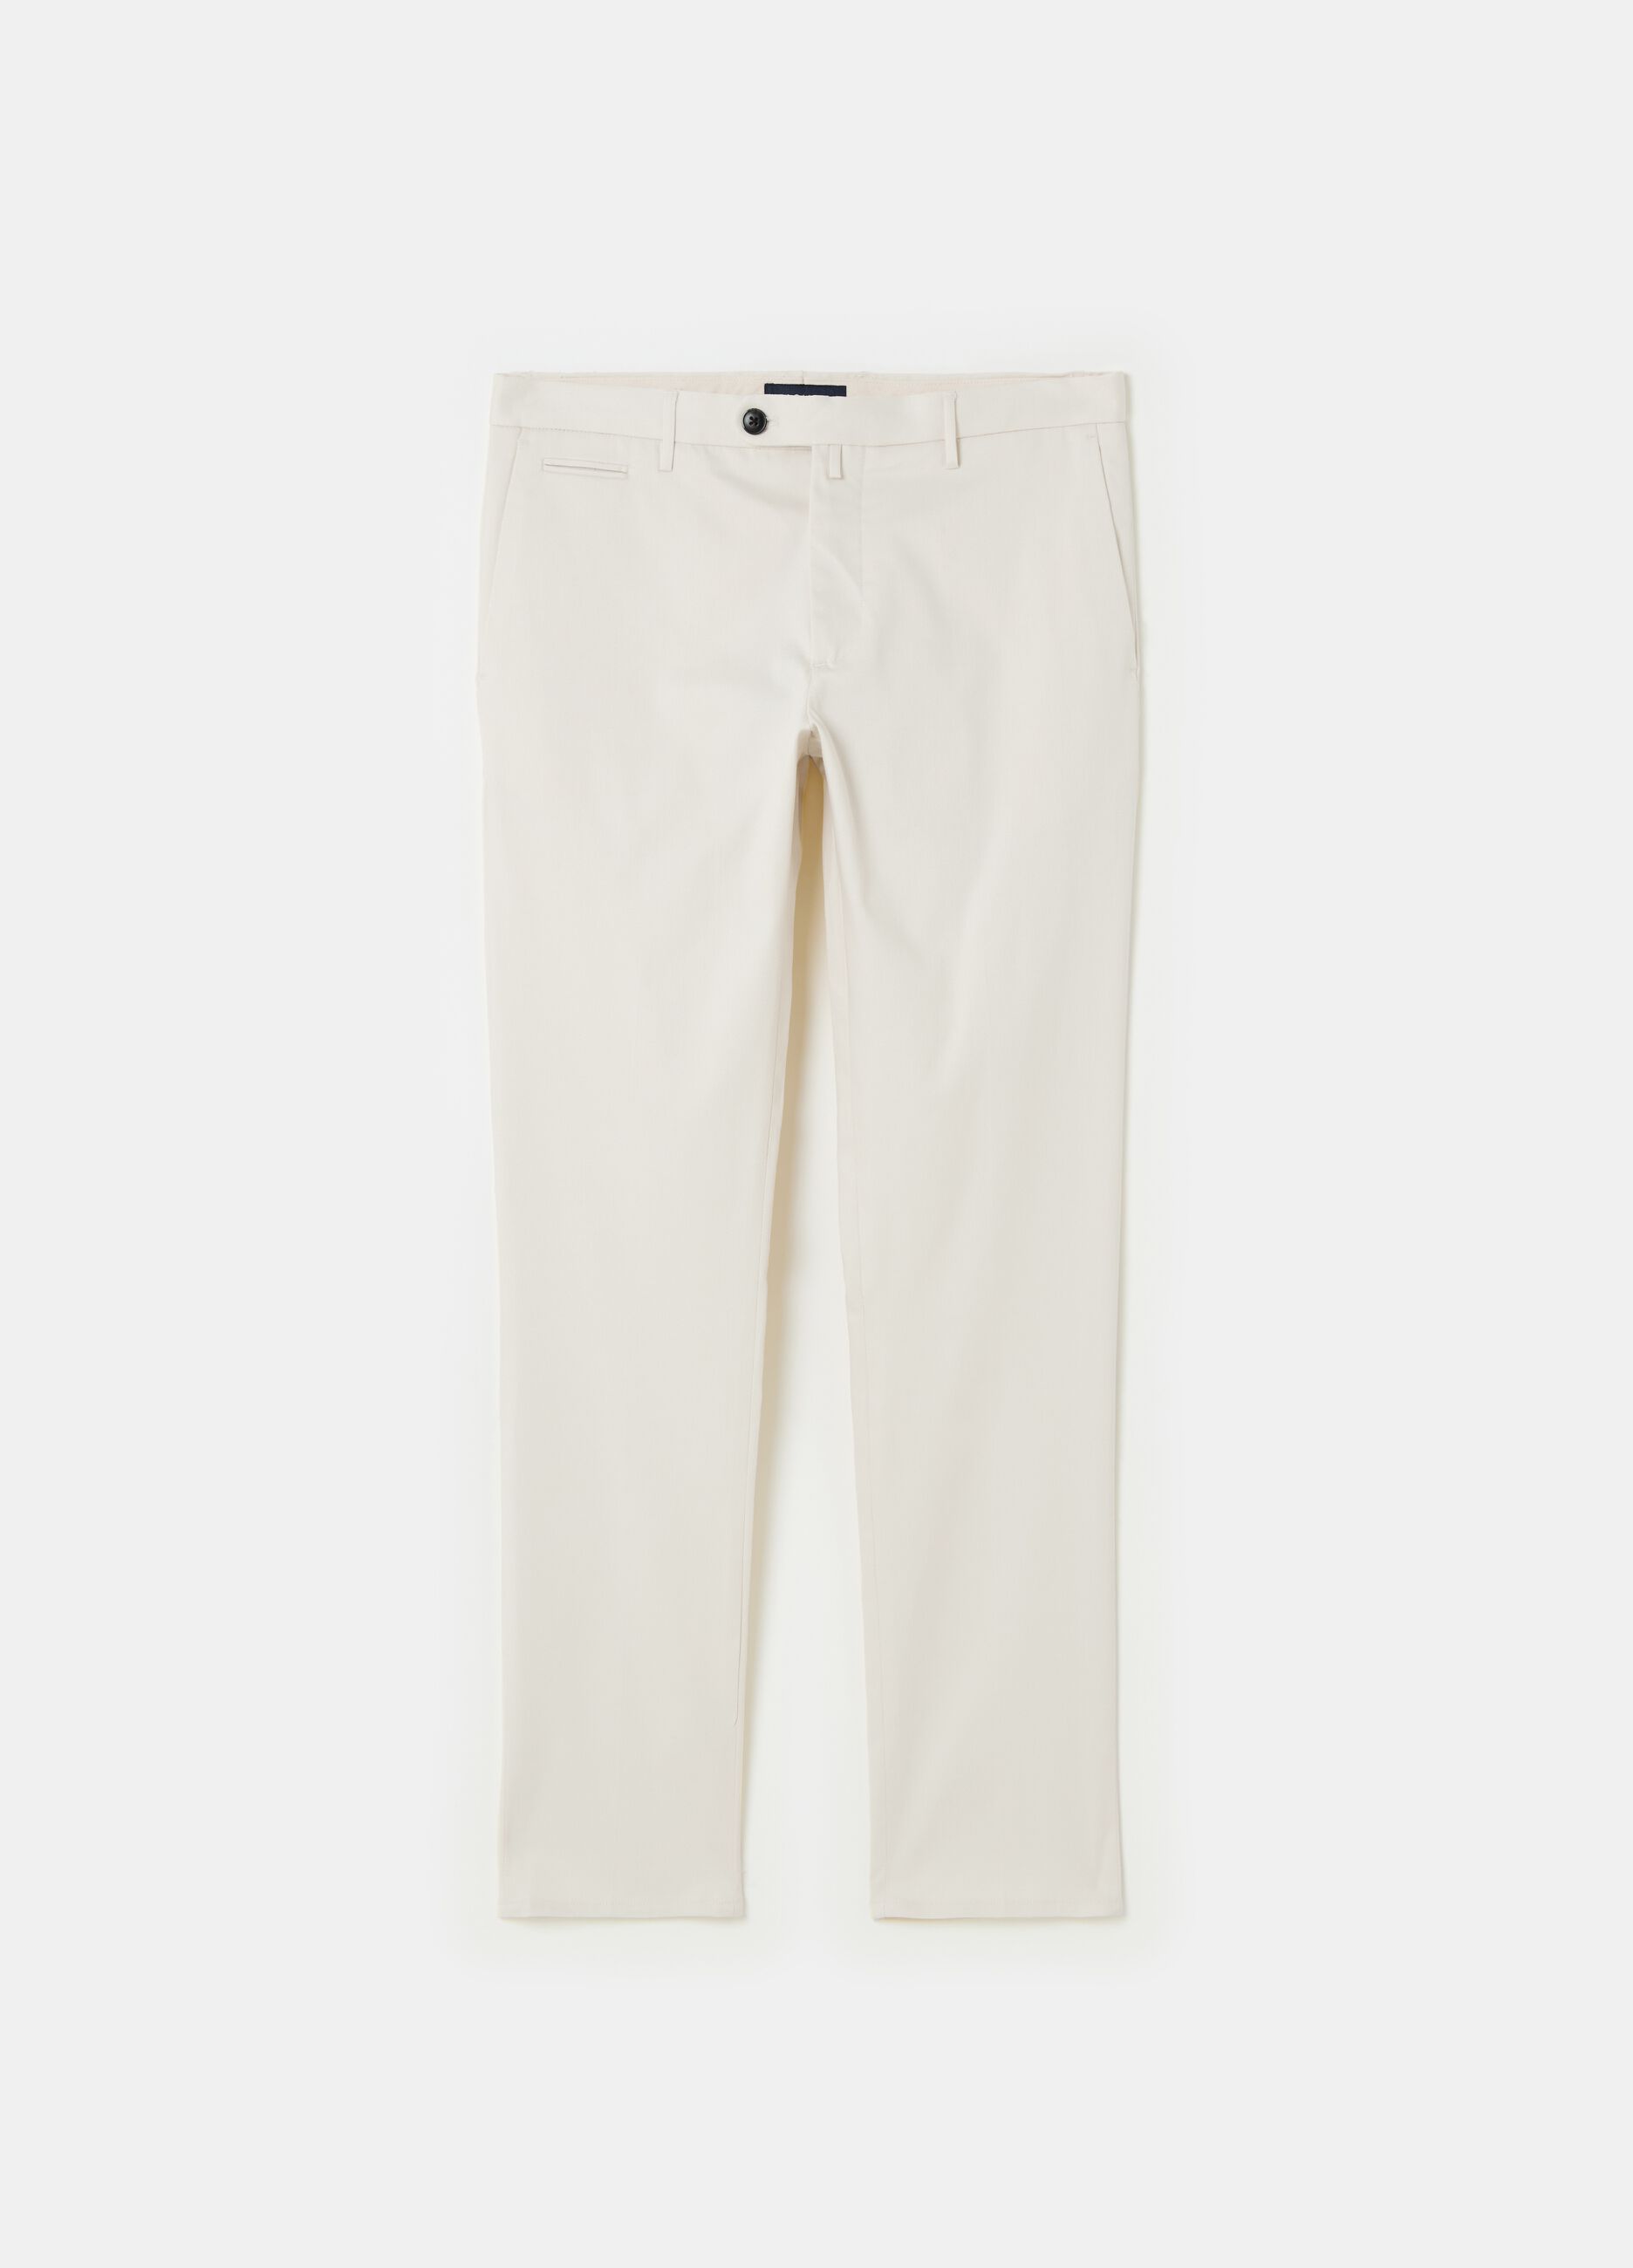 Contemporary chino trousers with five pockets